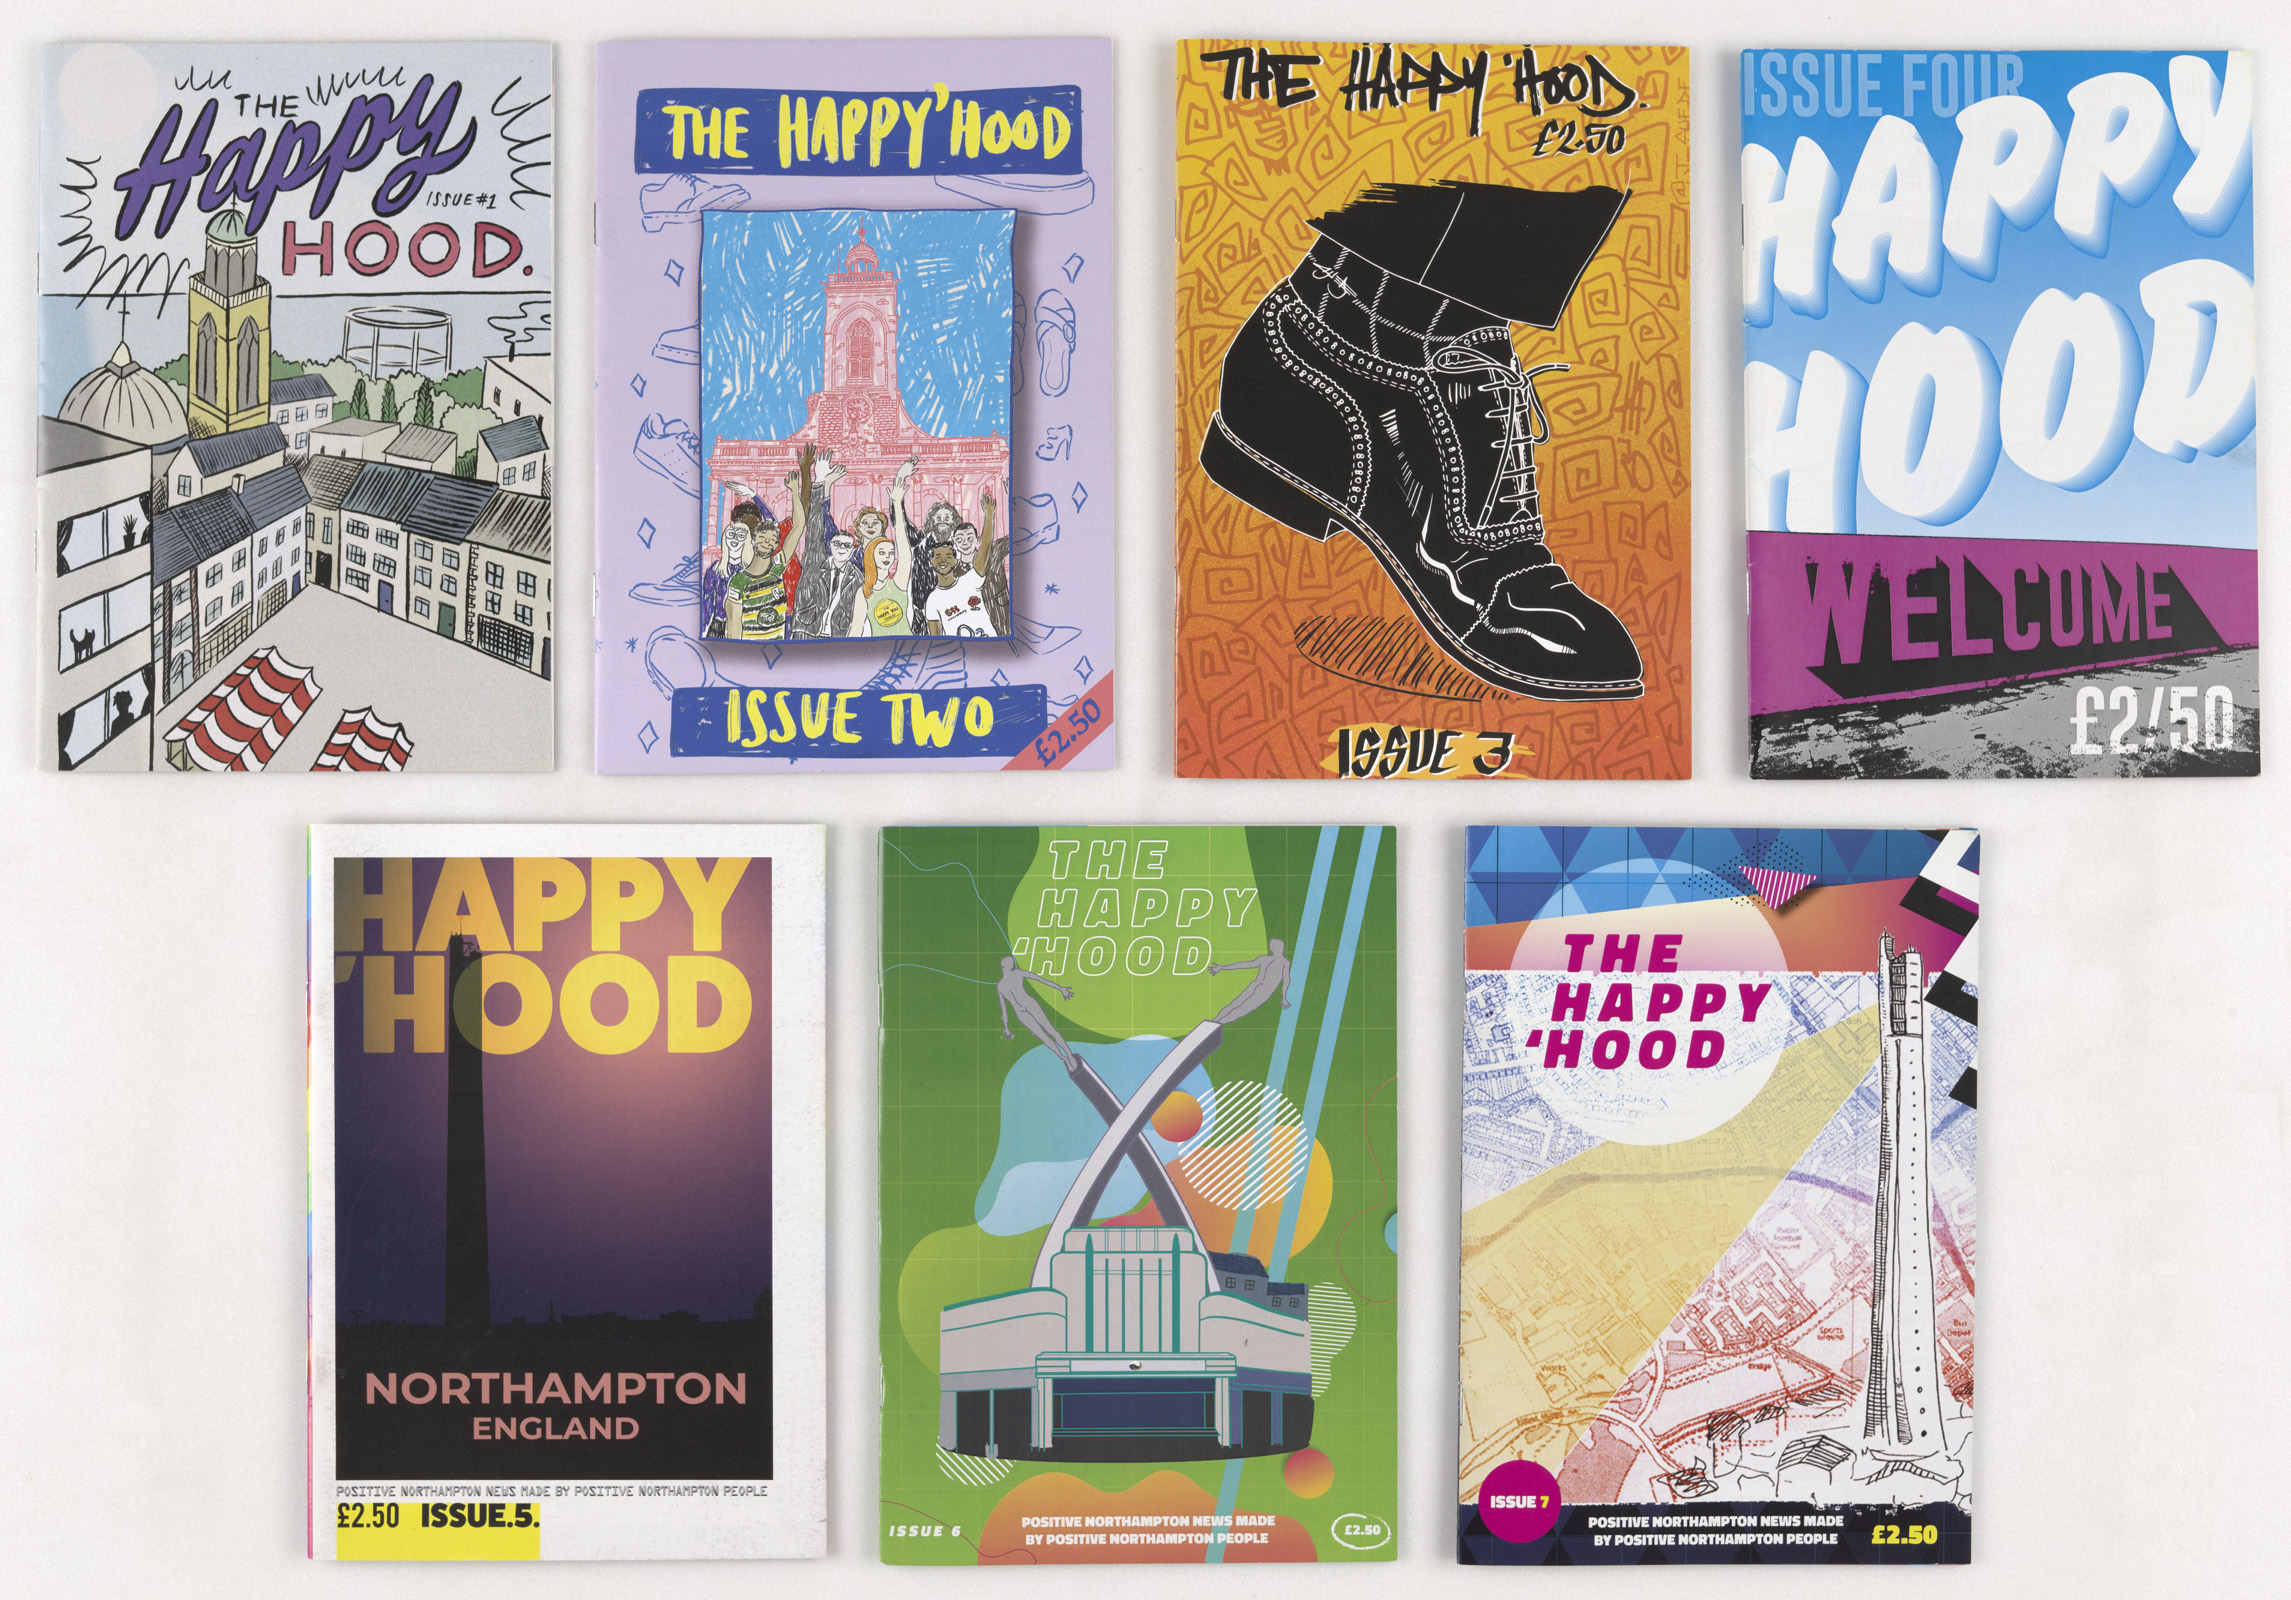 A photograph of 7 issues of Happy Hood zine, their covers facing the viewer. 